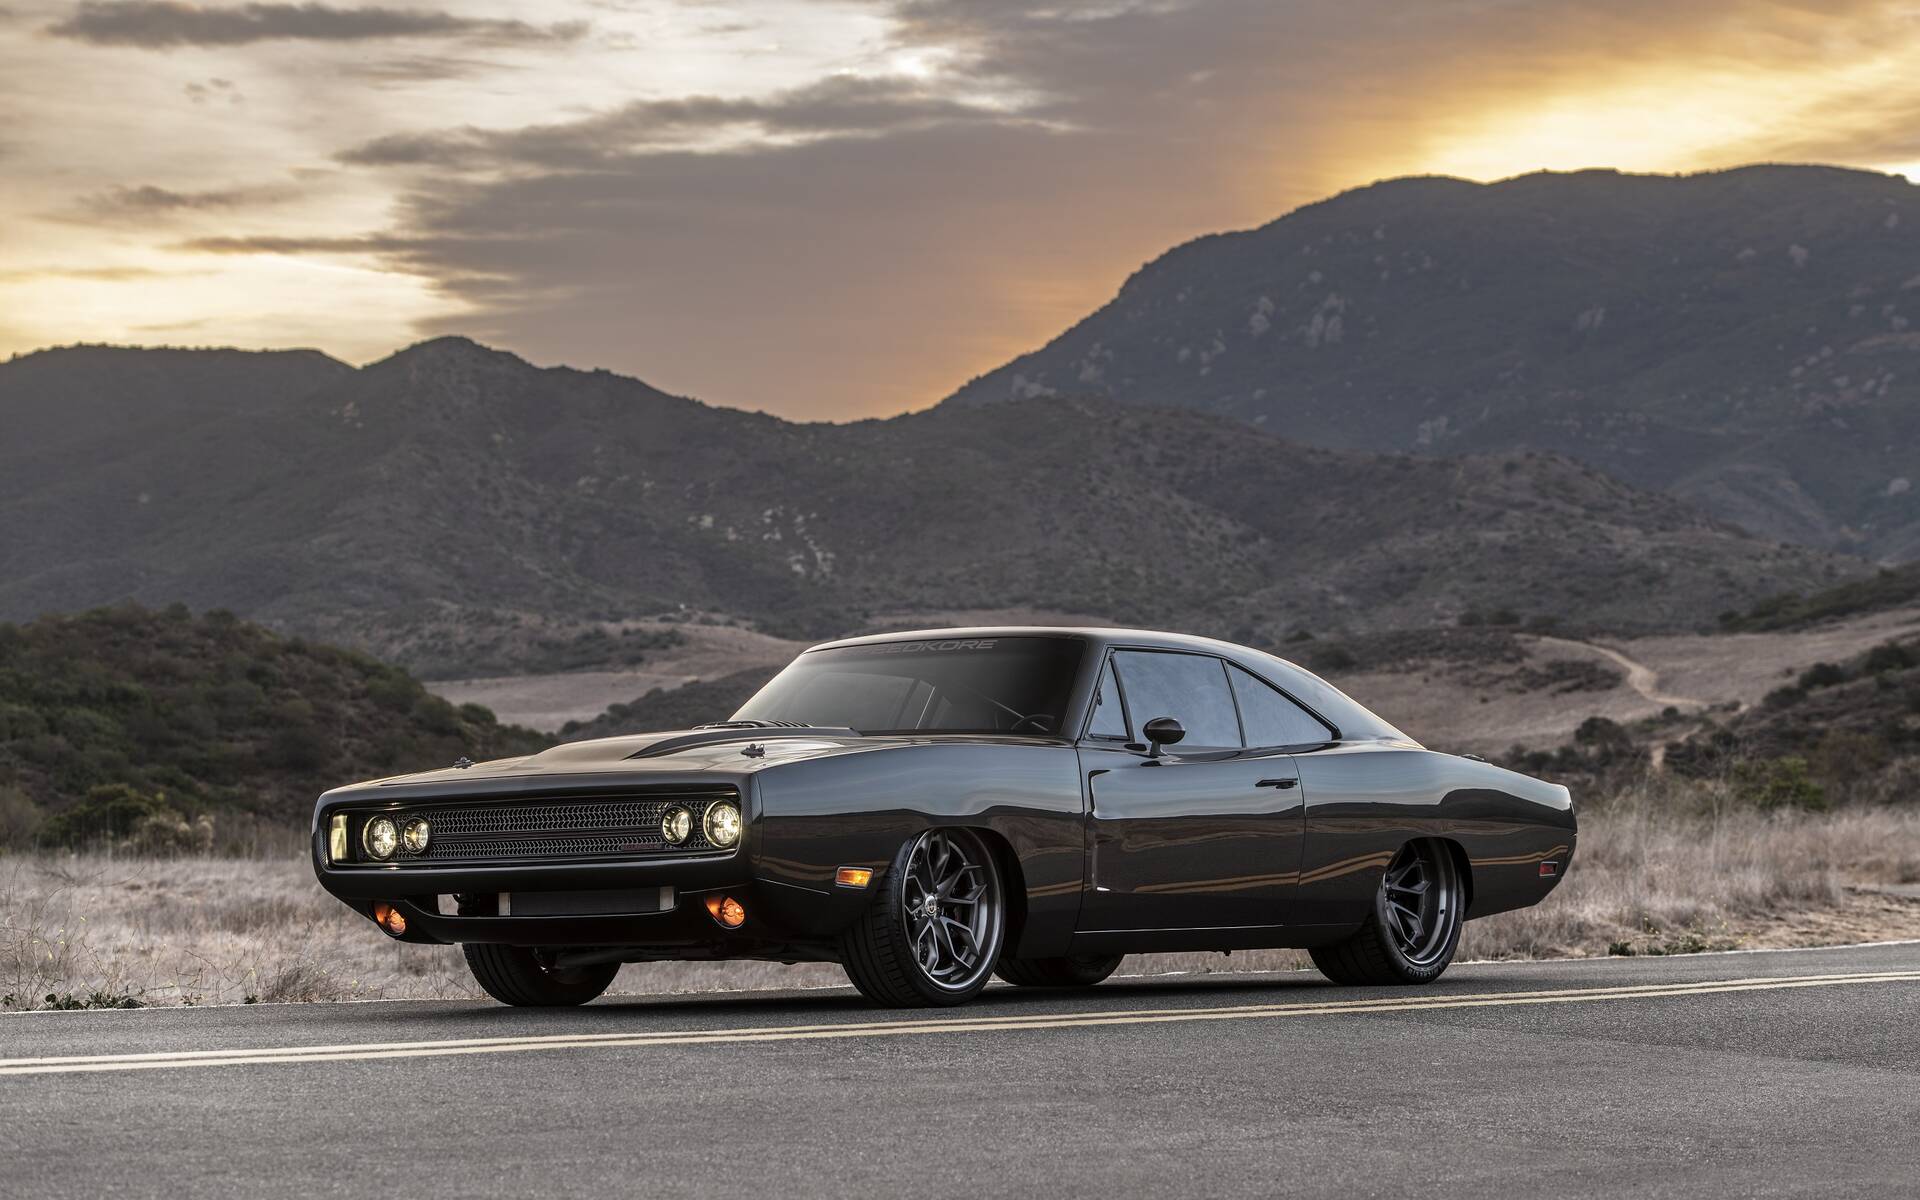 Carbon Fibre Bodied 1970 Dodge Charger With 1000 Hp Raises Hell The